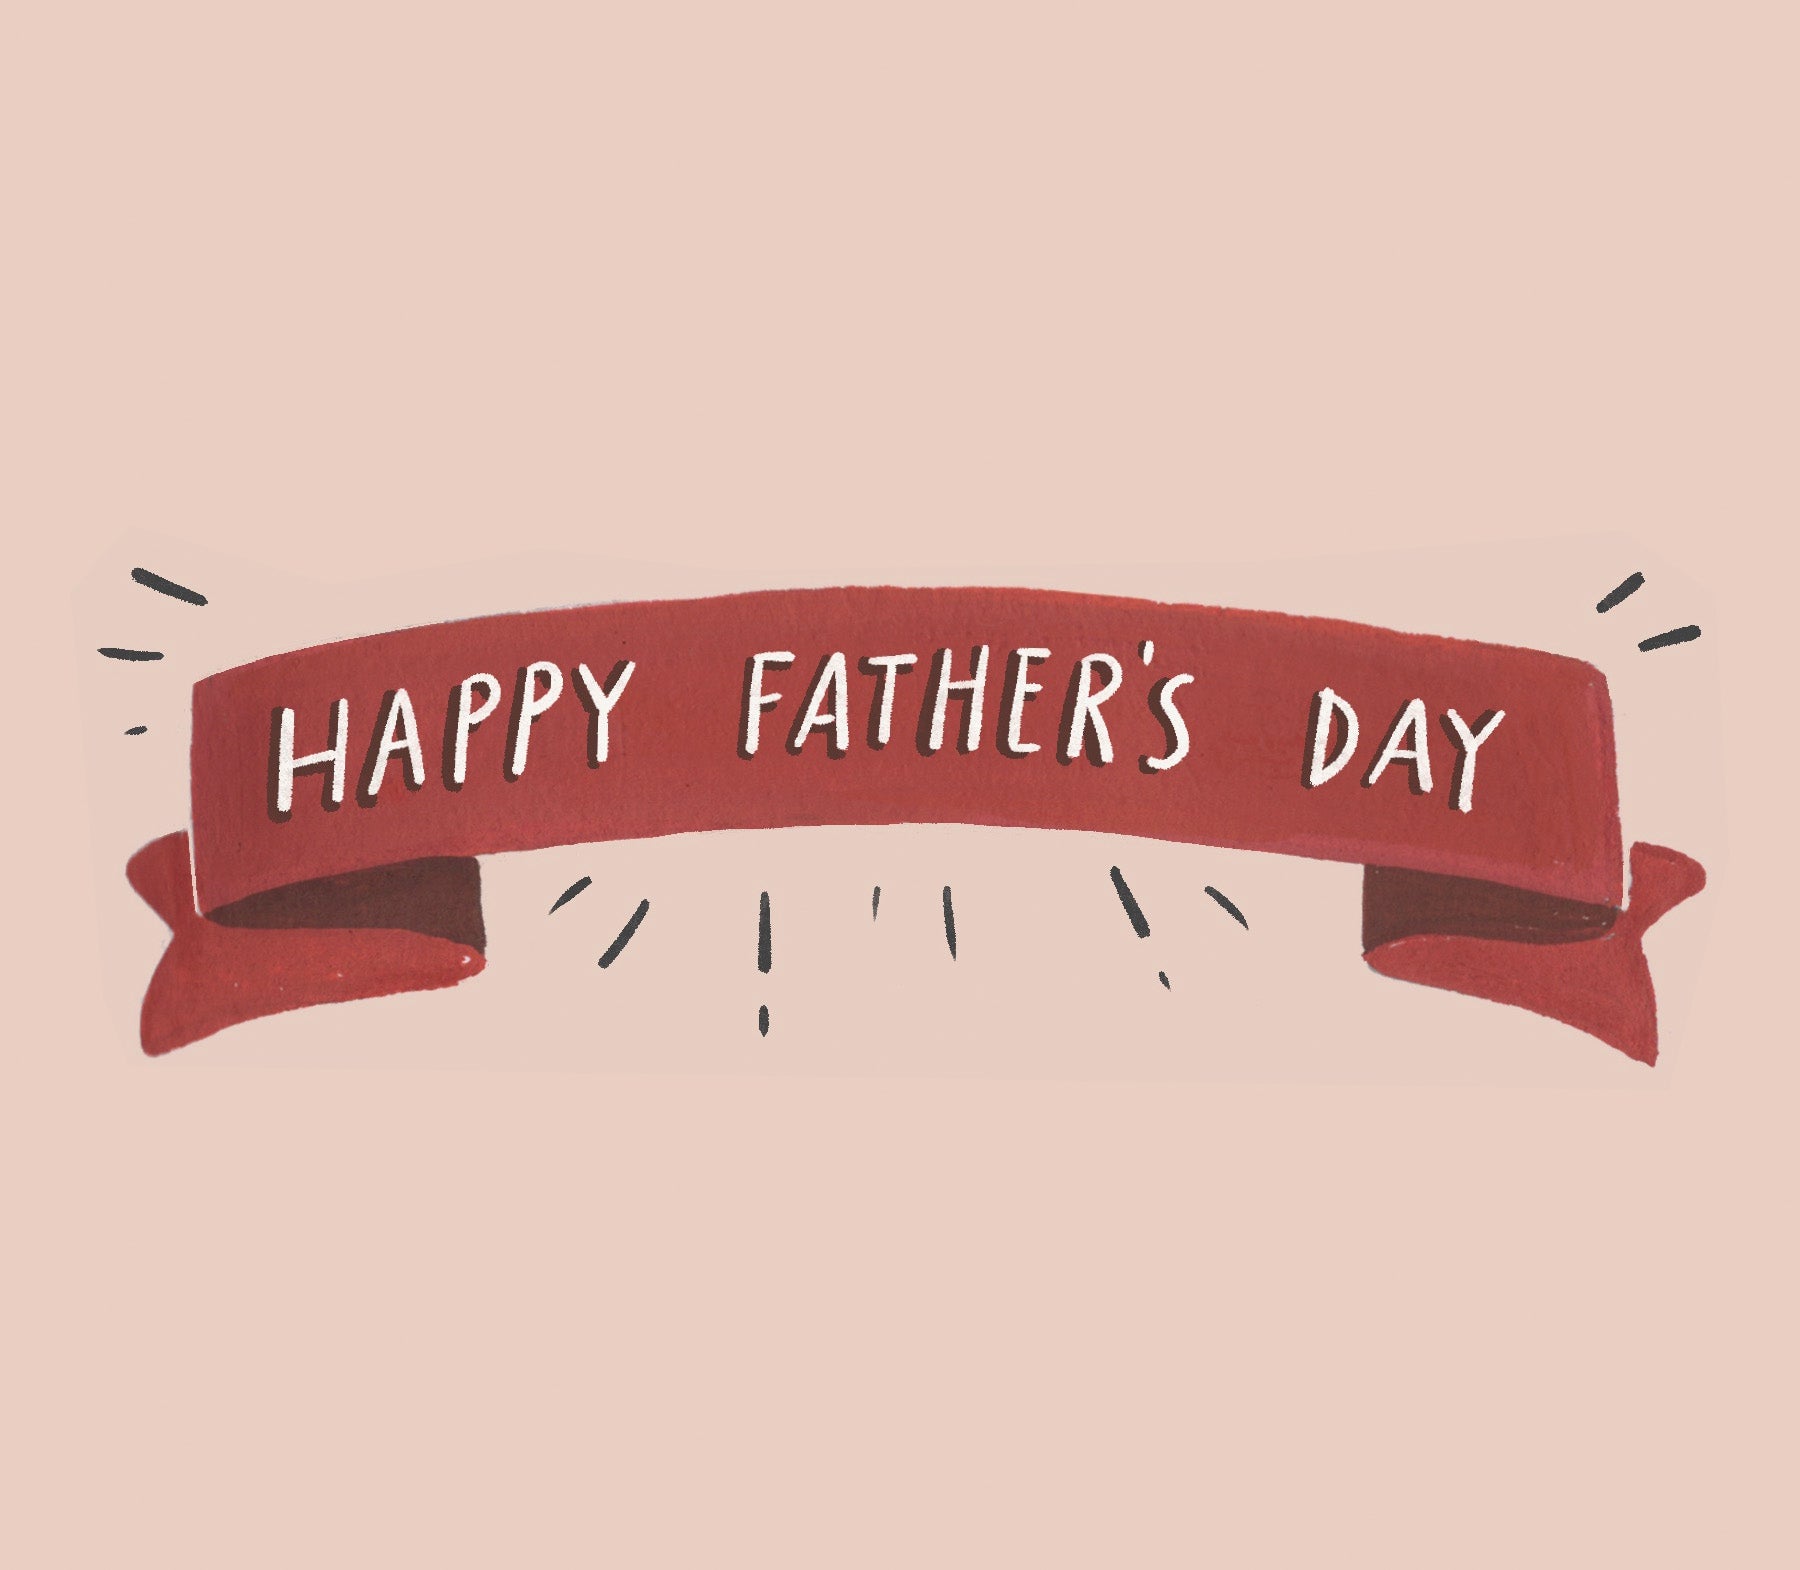 Father's Day Cards â€“ The Ink Bucket